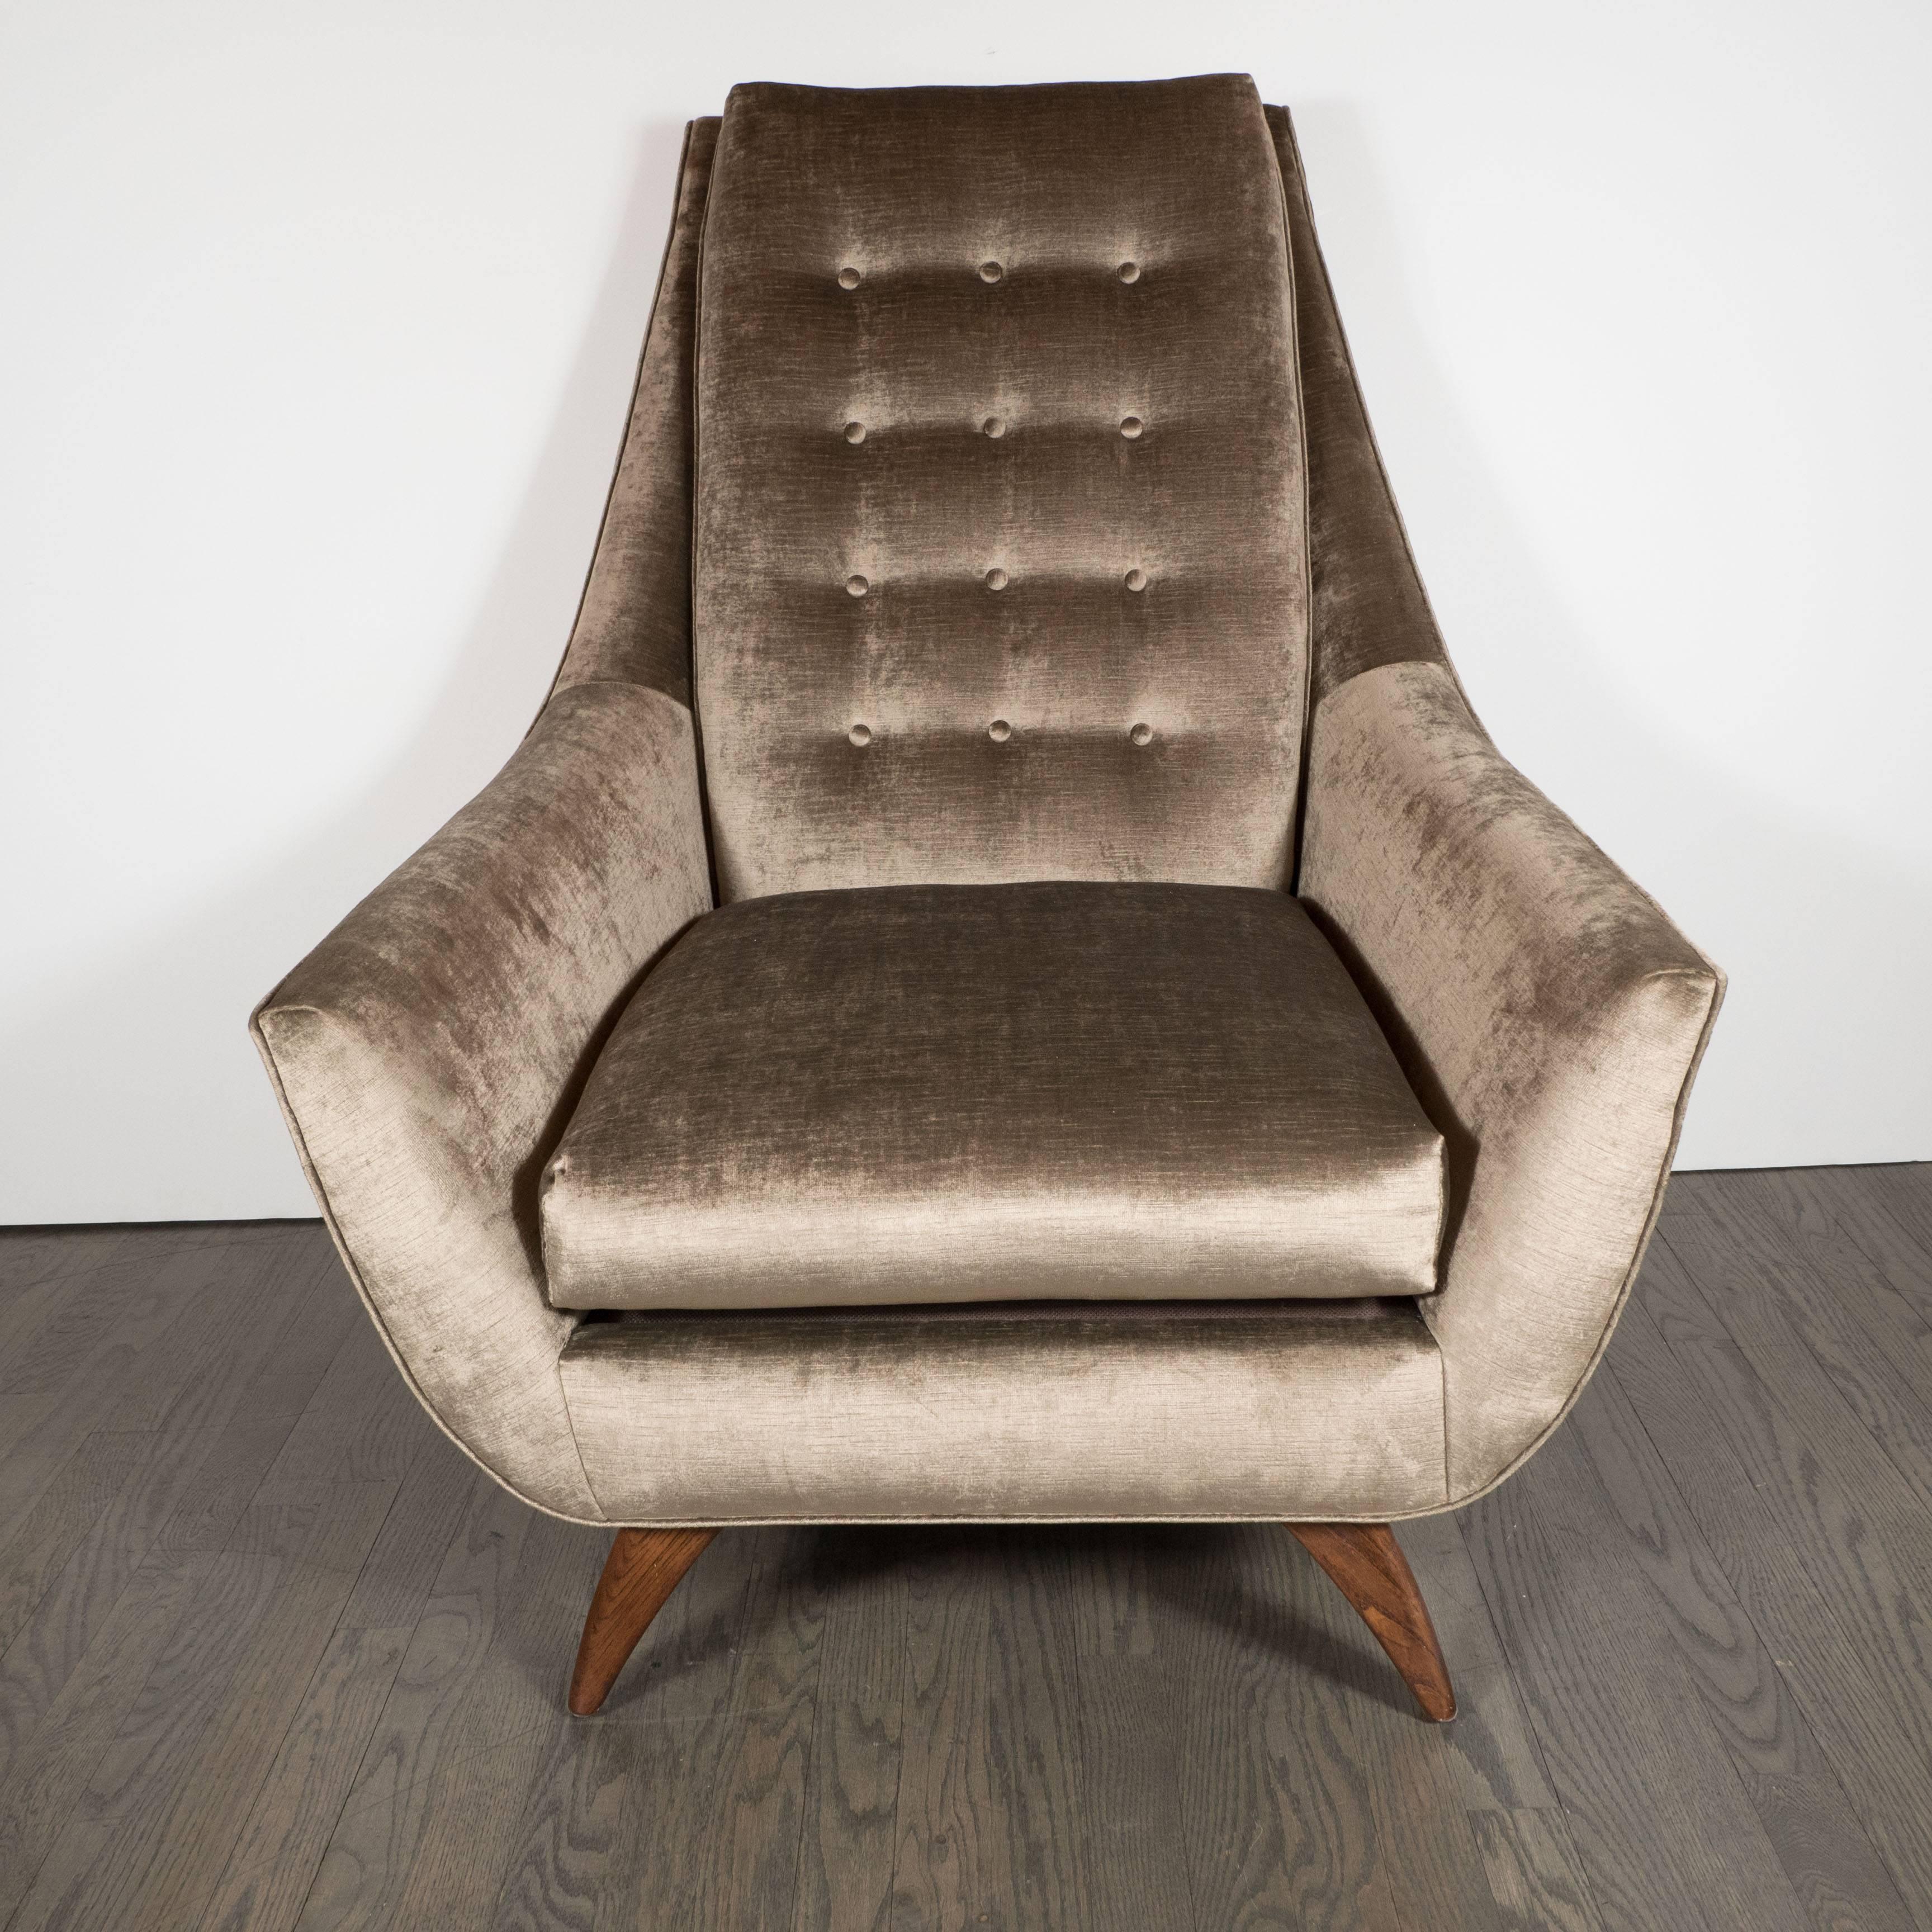 An sophisticated Mid-Century Modernist button back club chair by Adrian Pearsall in walnut and smoked platinum velvet, American, circa 1960.
This stylish club chair on attractively splayed tapered walnut legs; the seat itself sports a large